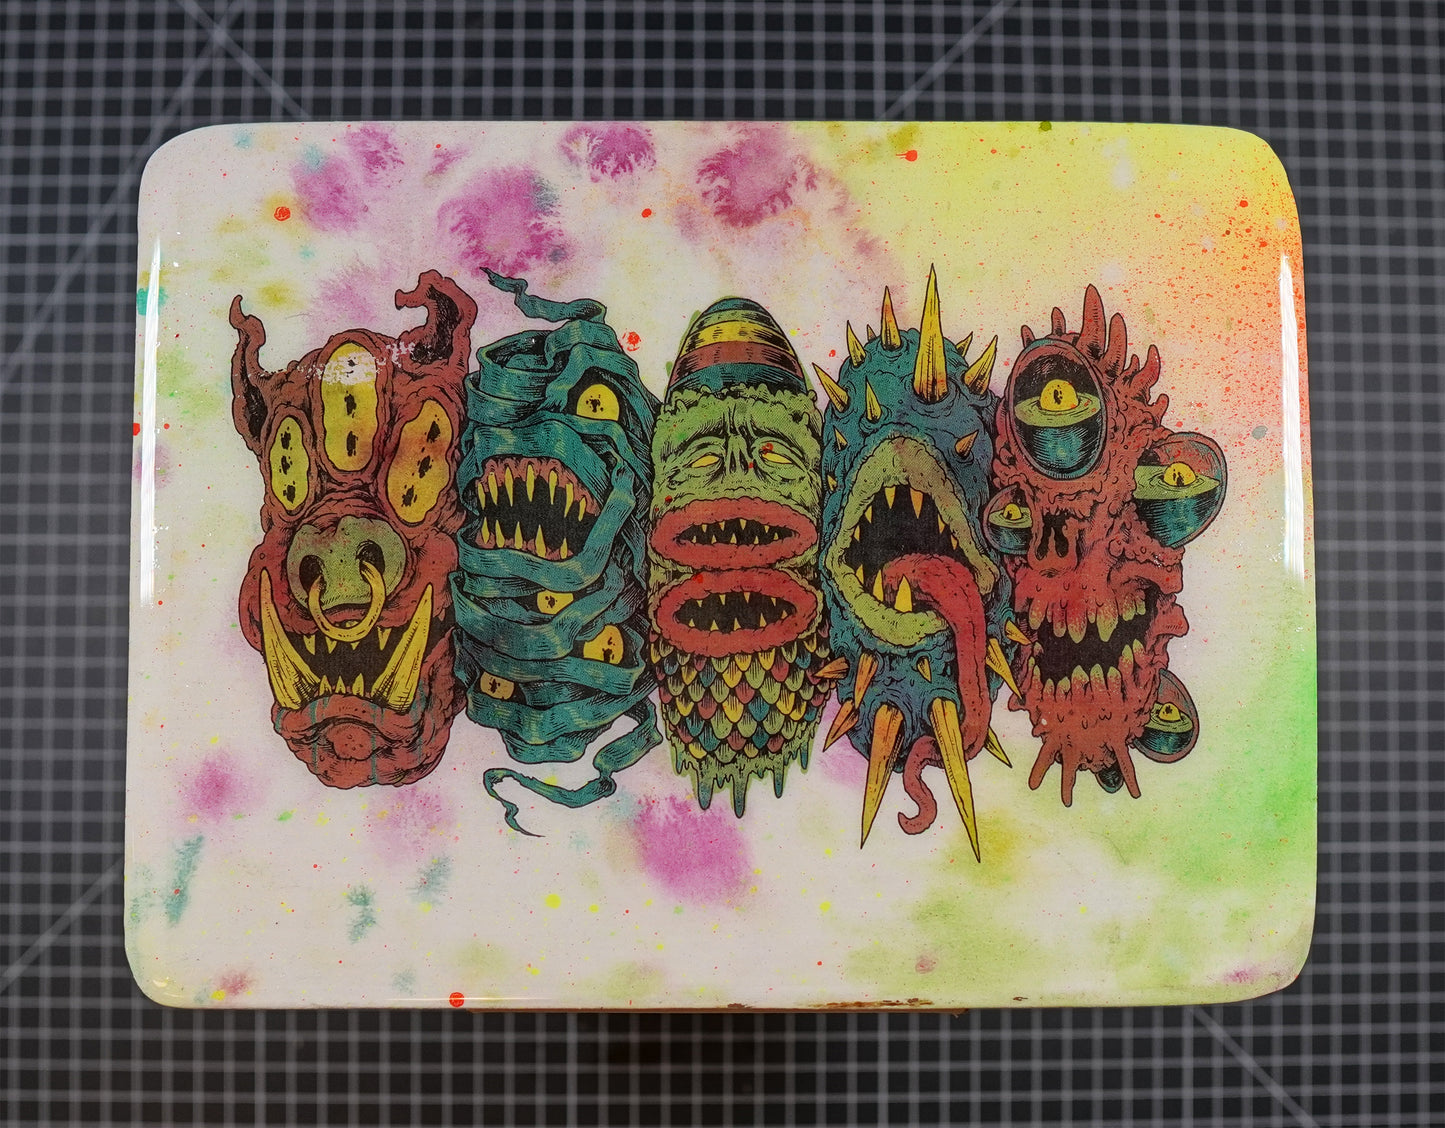 5 More Monster Heads in a Row - Wood Transfer